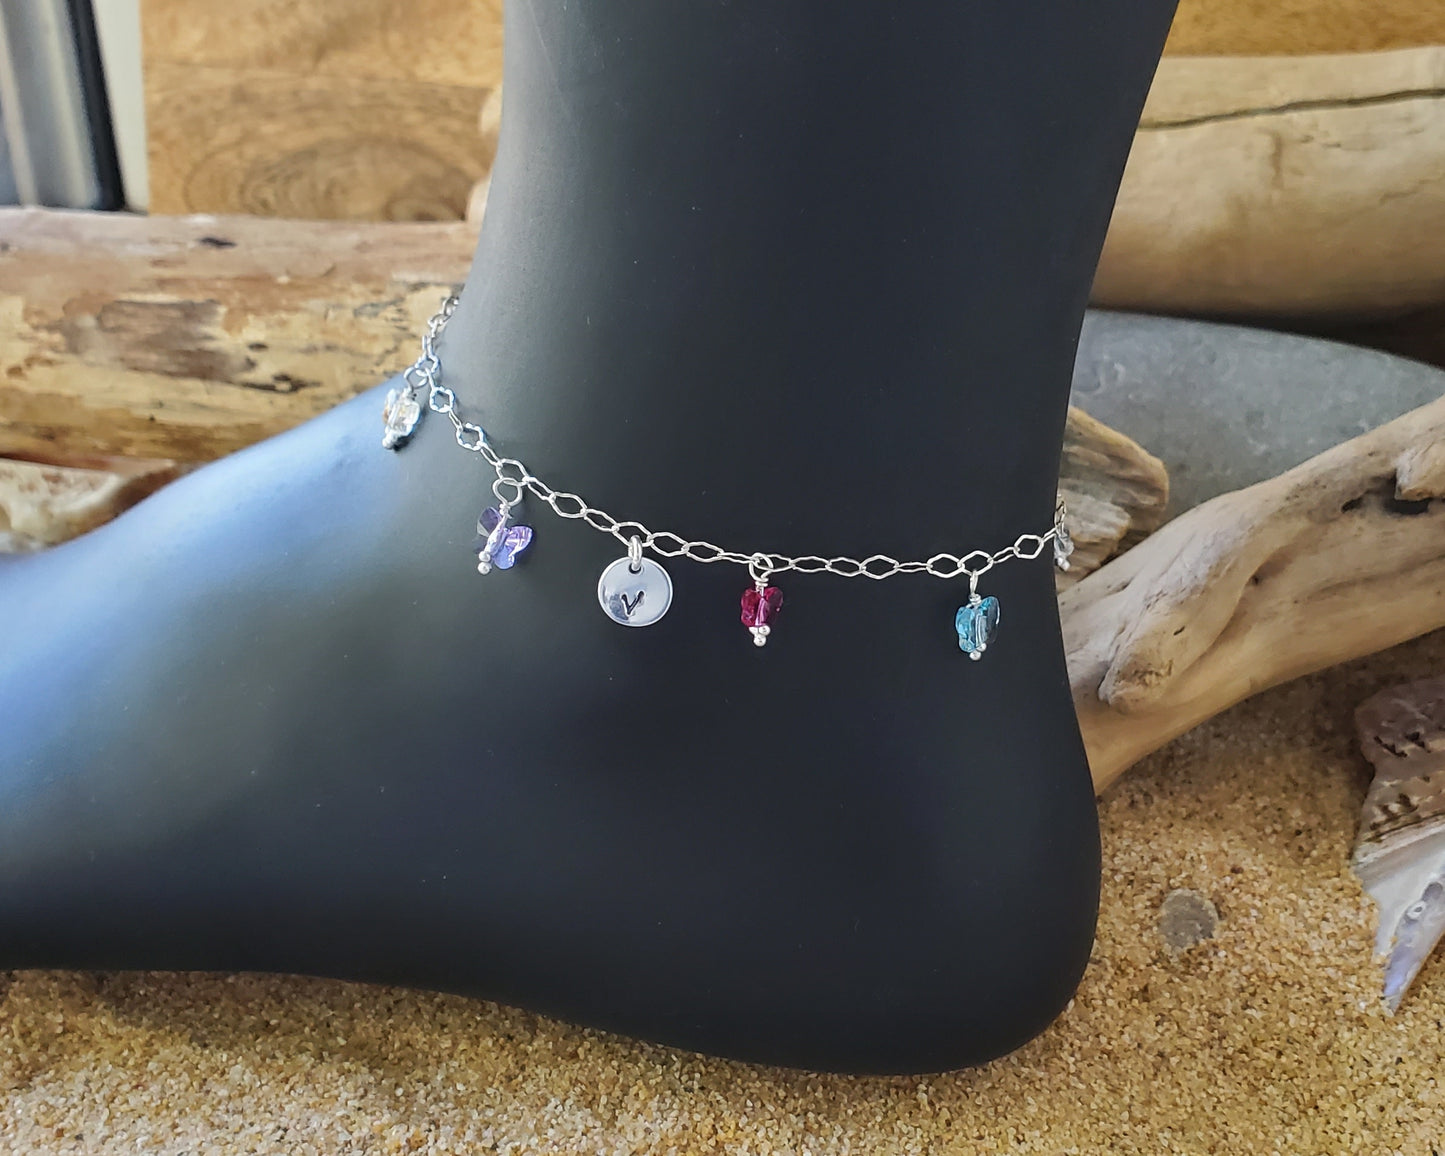 Personalized Crystal Butterfly Dangle Initial Anklet, Ankle Bracelet, Sterling Silver diamond shaped chain with dangling Multi Color Crystal Butterflies and an Initial Pendant 